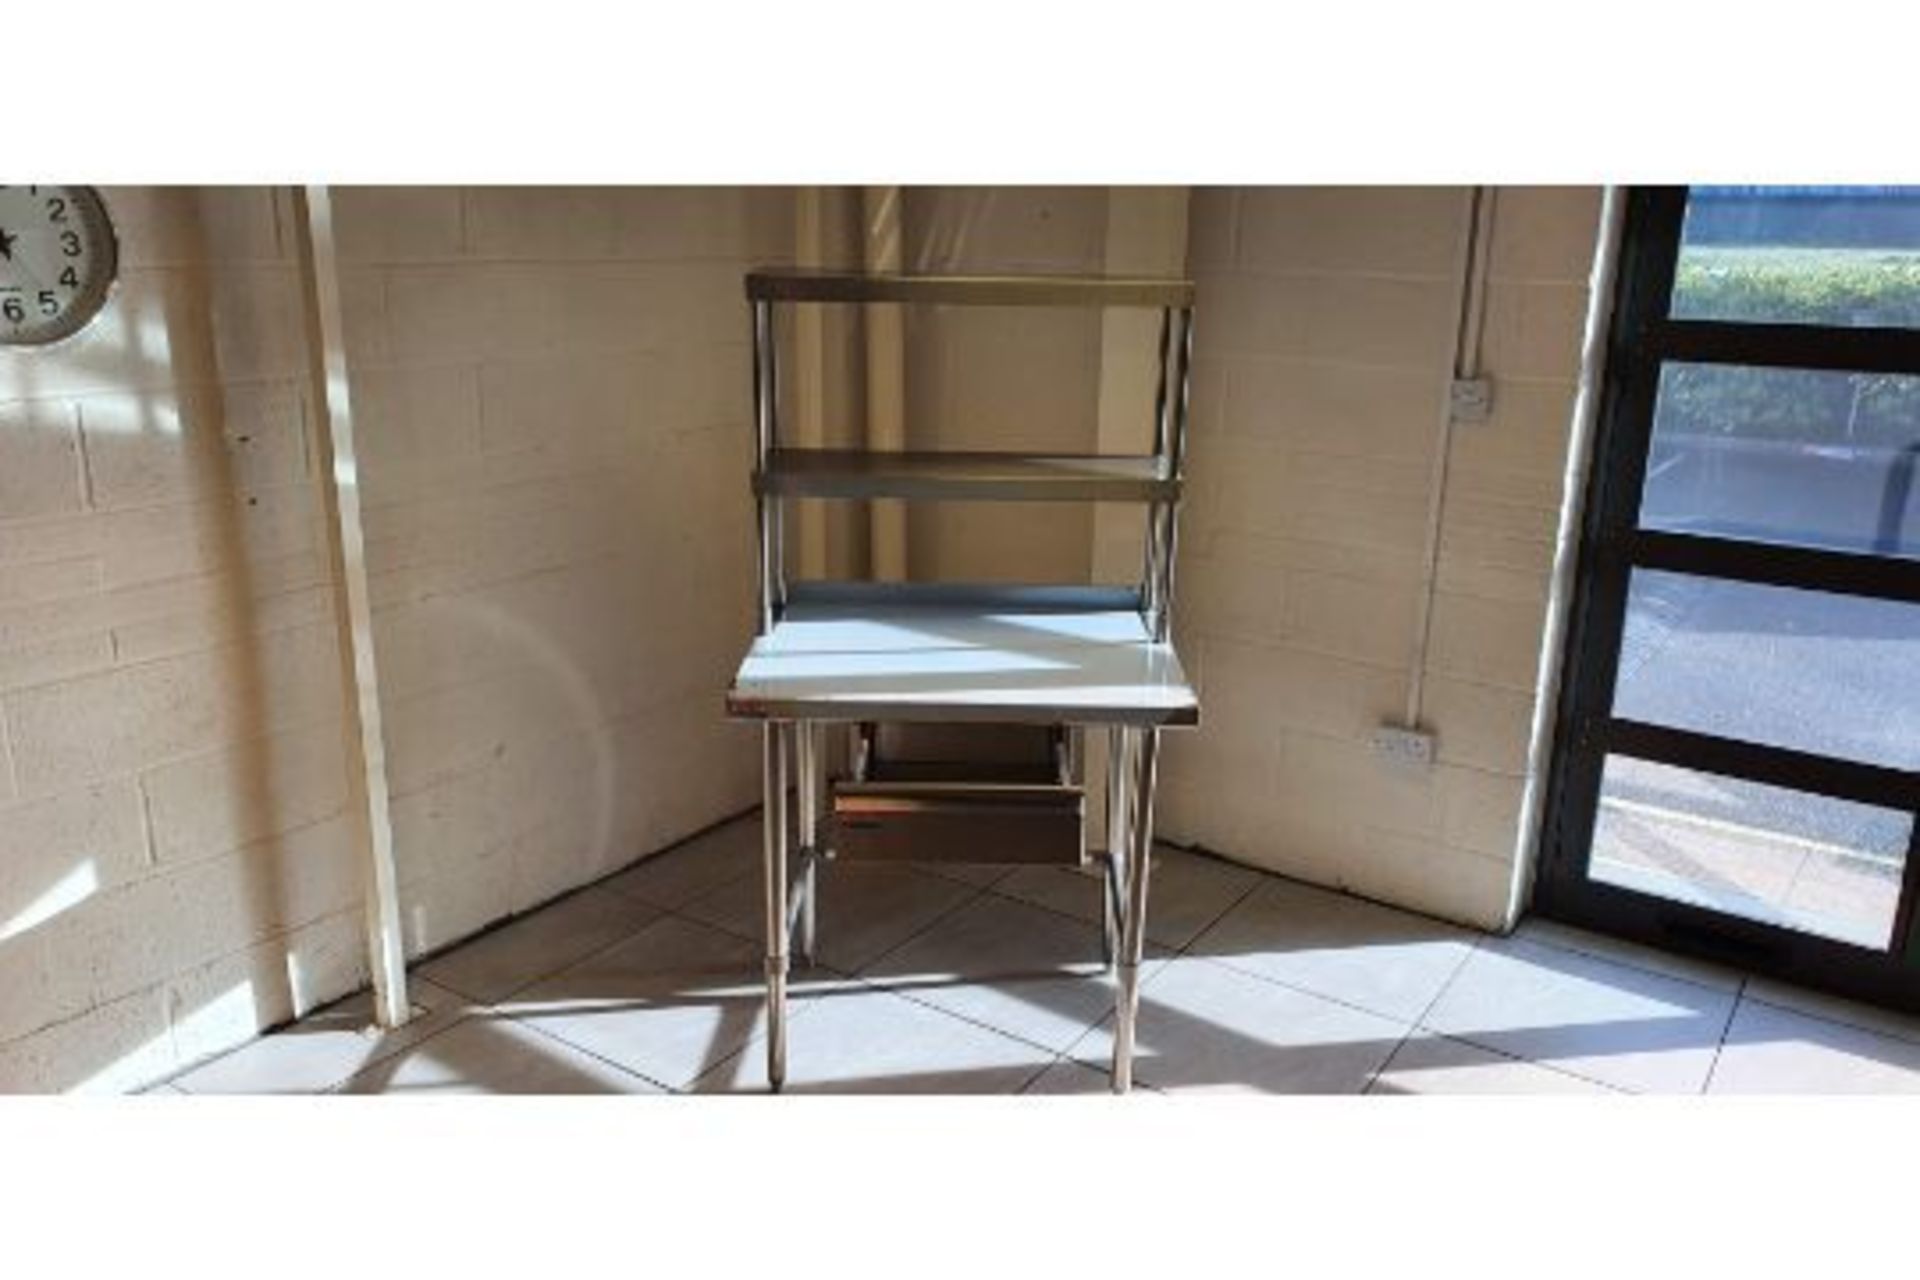 Stainless Steel Table - With Drawer & Overshelf - Image 2 of 4